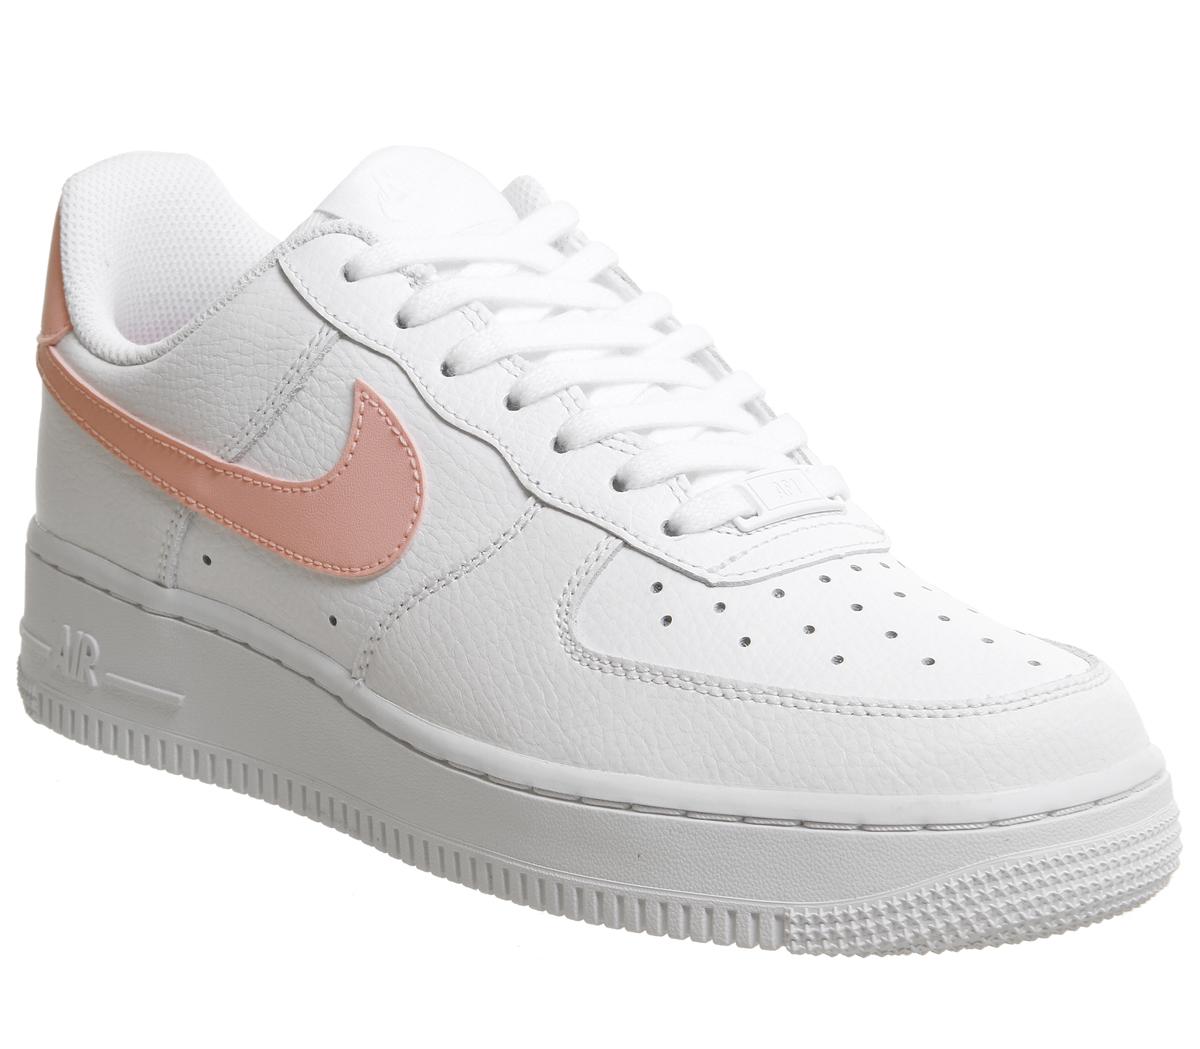 nike air force 1s pink